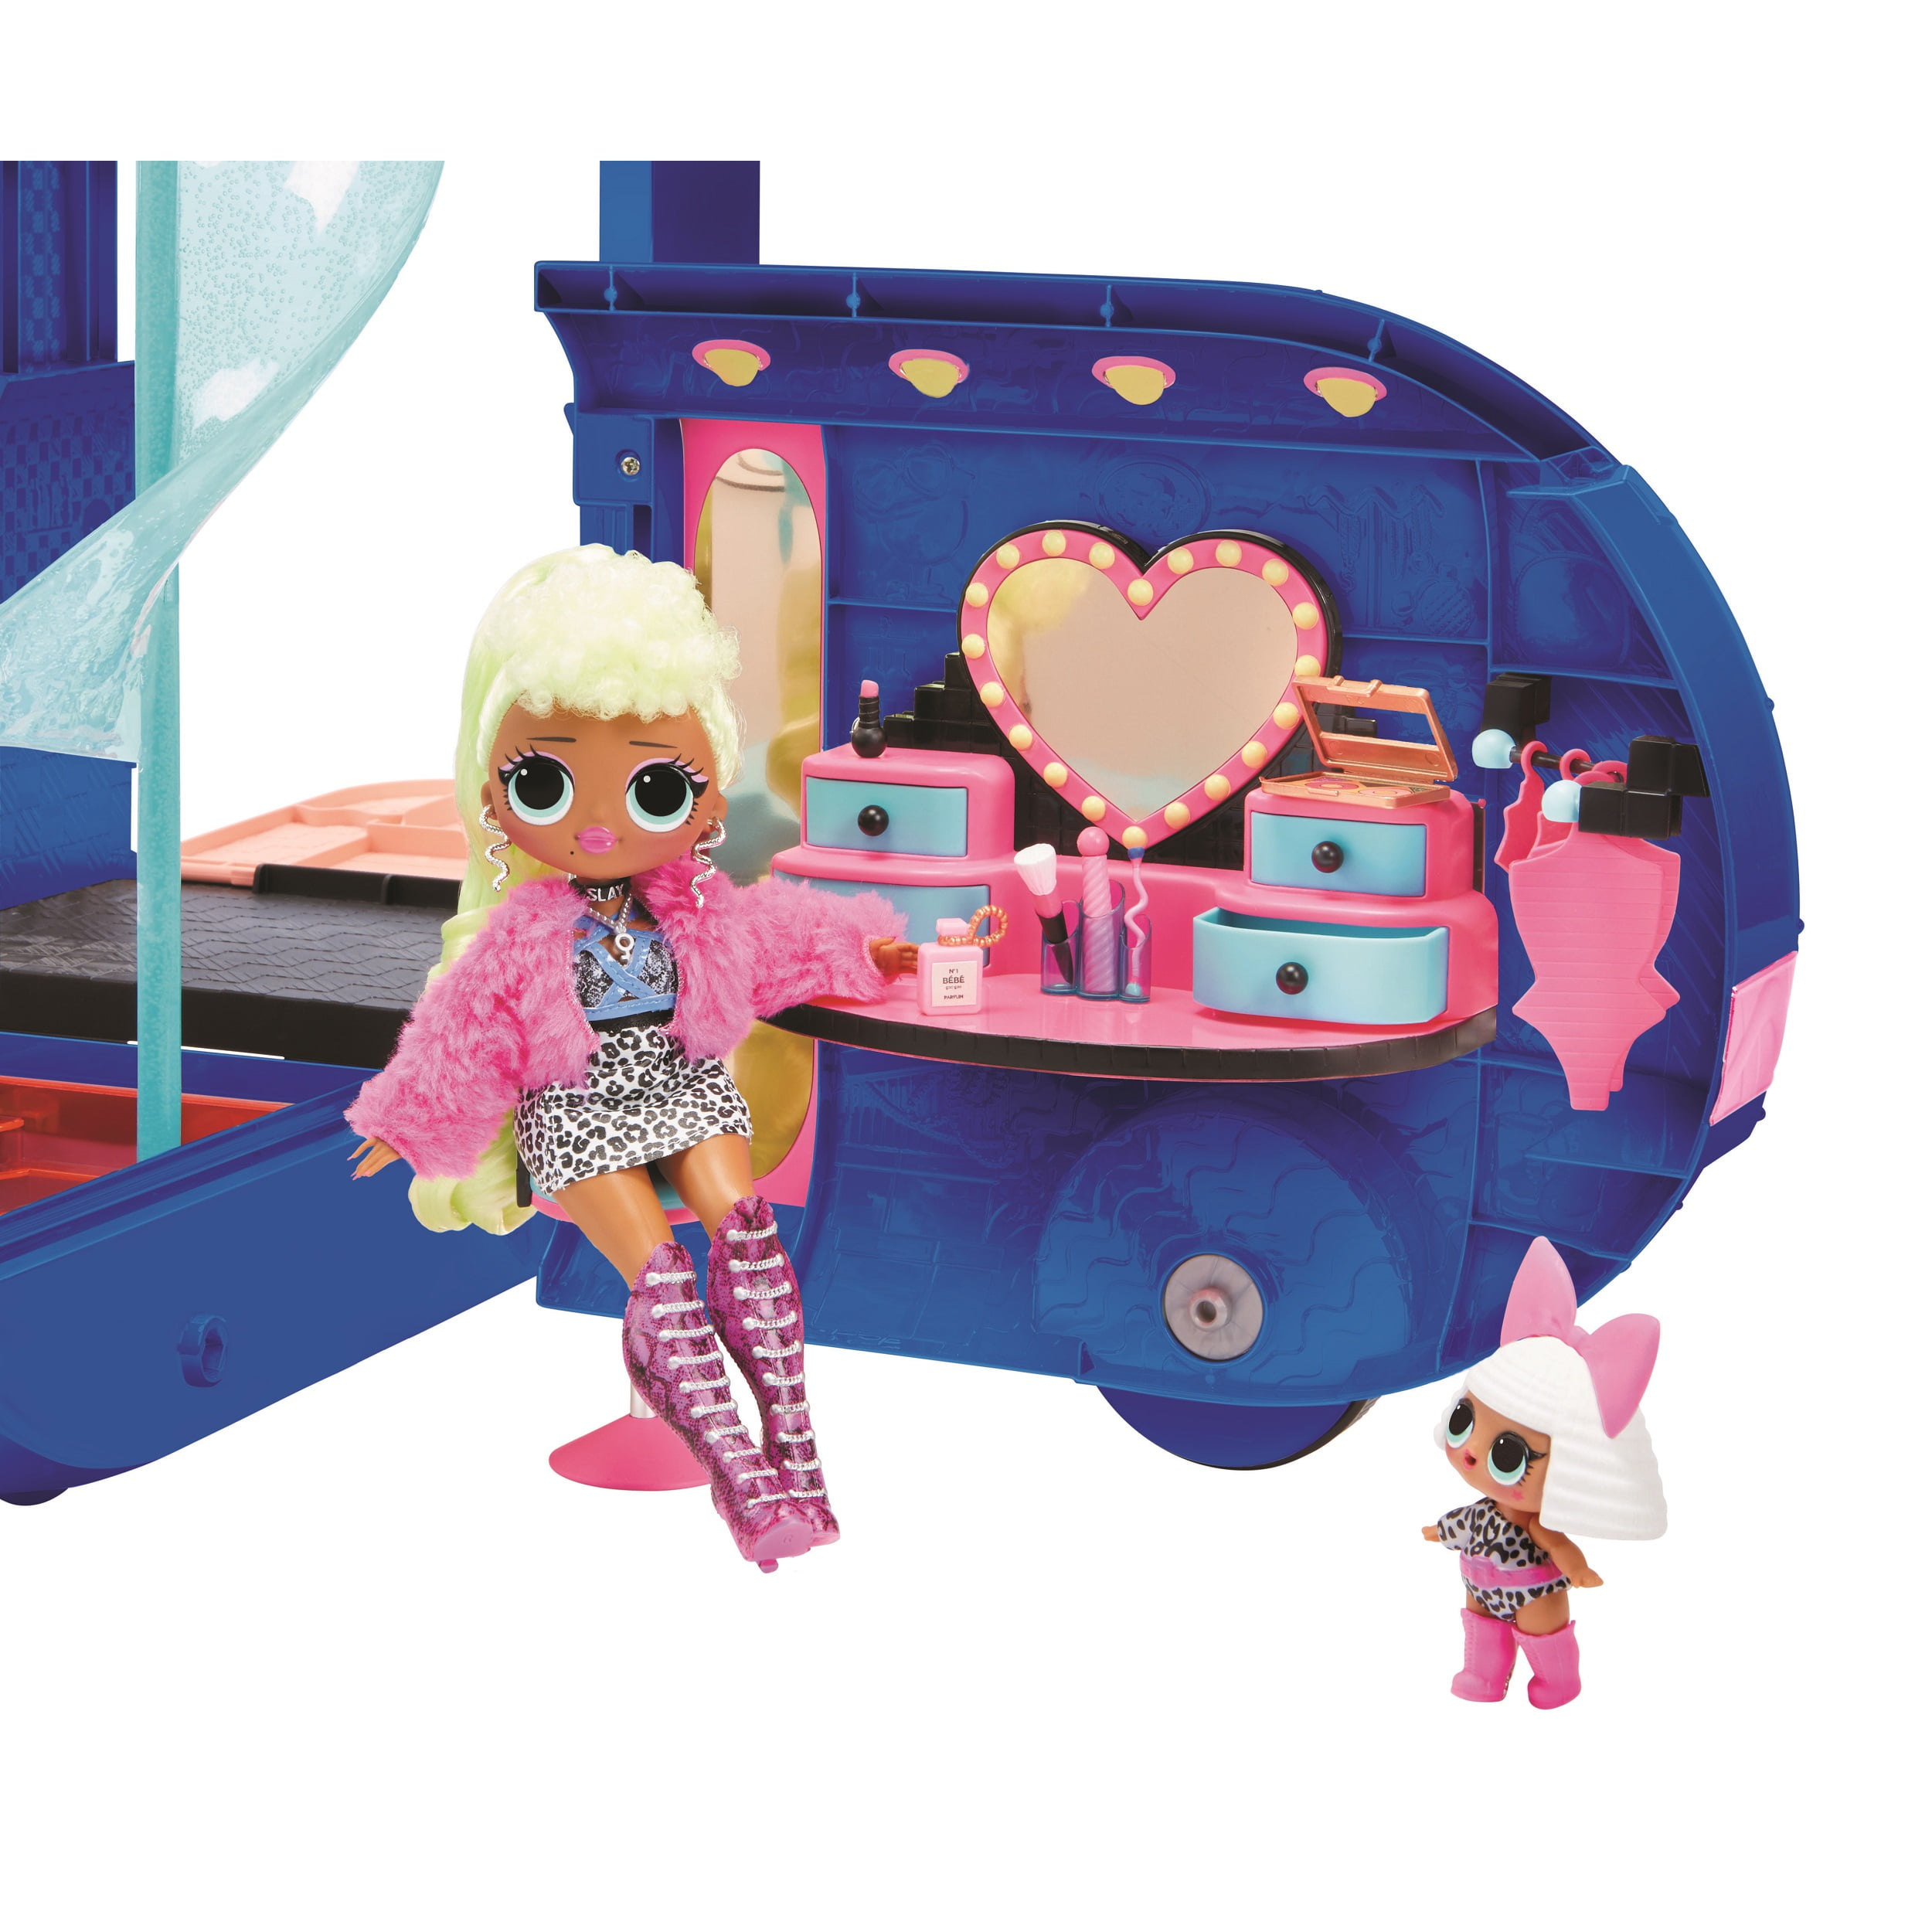 interference Defile Invoice L.O.L. Surprise! 4-in-1 Glamper Doll Playset, 55 Pieces - Walmart.com